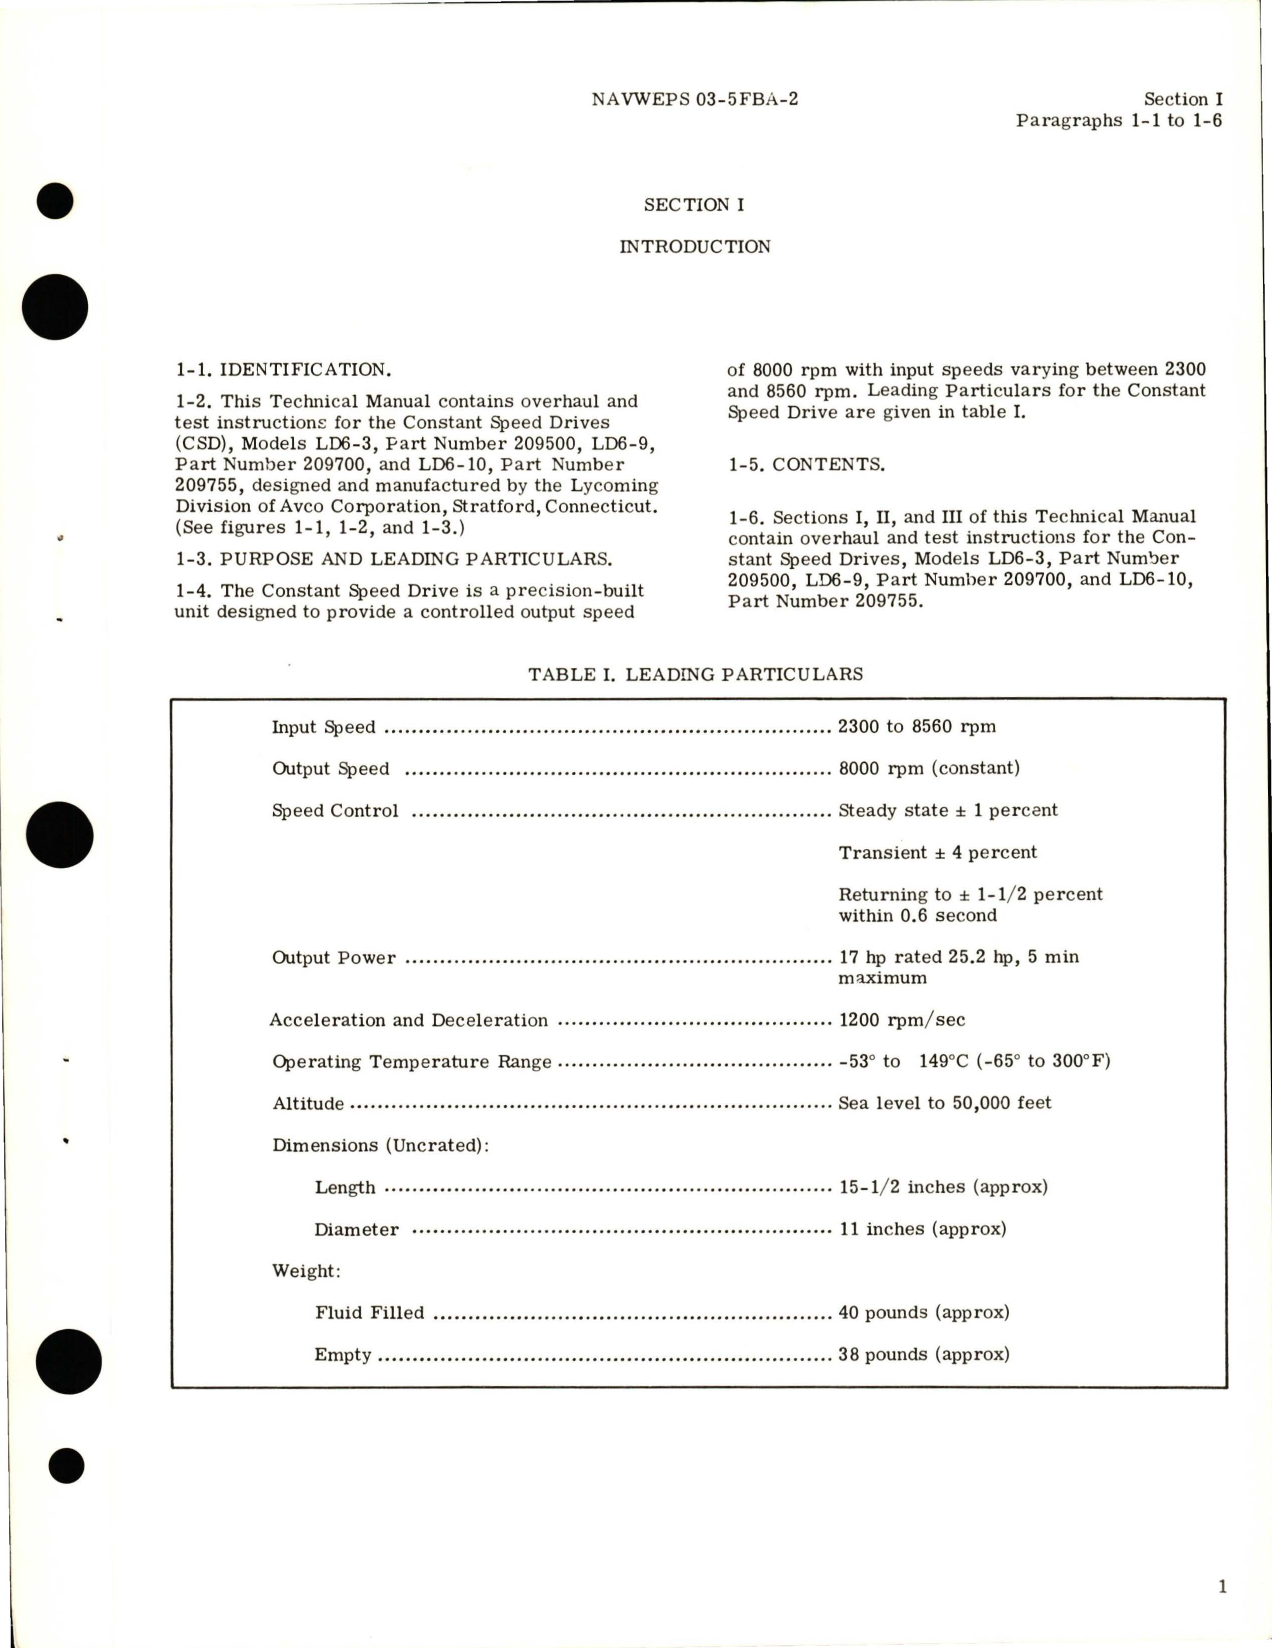 Sample page 7 from AirCorps Library document: Overhaul Instructions for Constant Speed Drive - Models LD6-3, LD6-9, and LD6-10 - Parts 209500, 209700, and 209755 